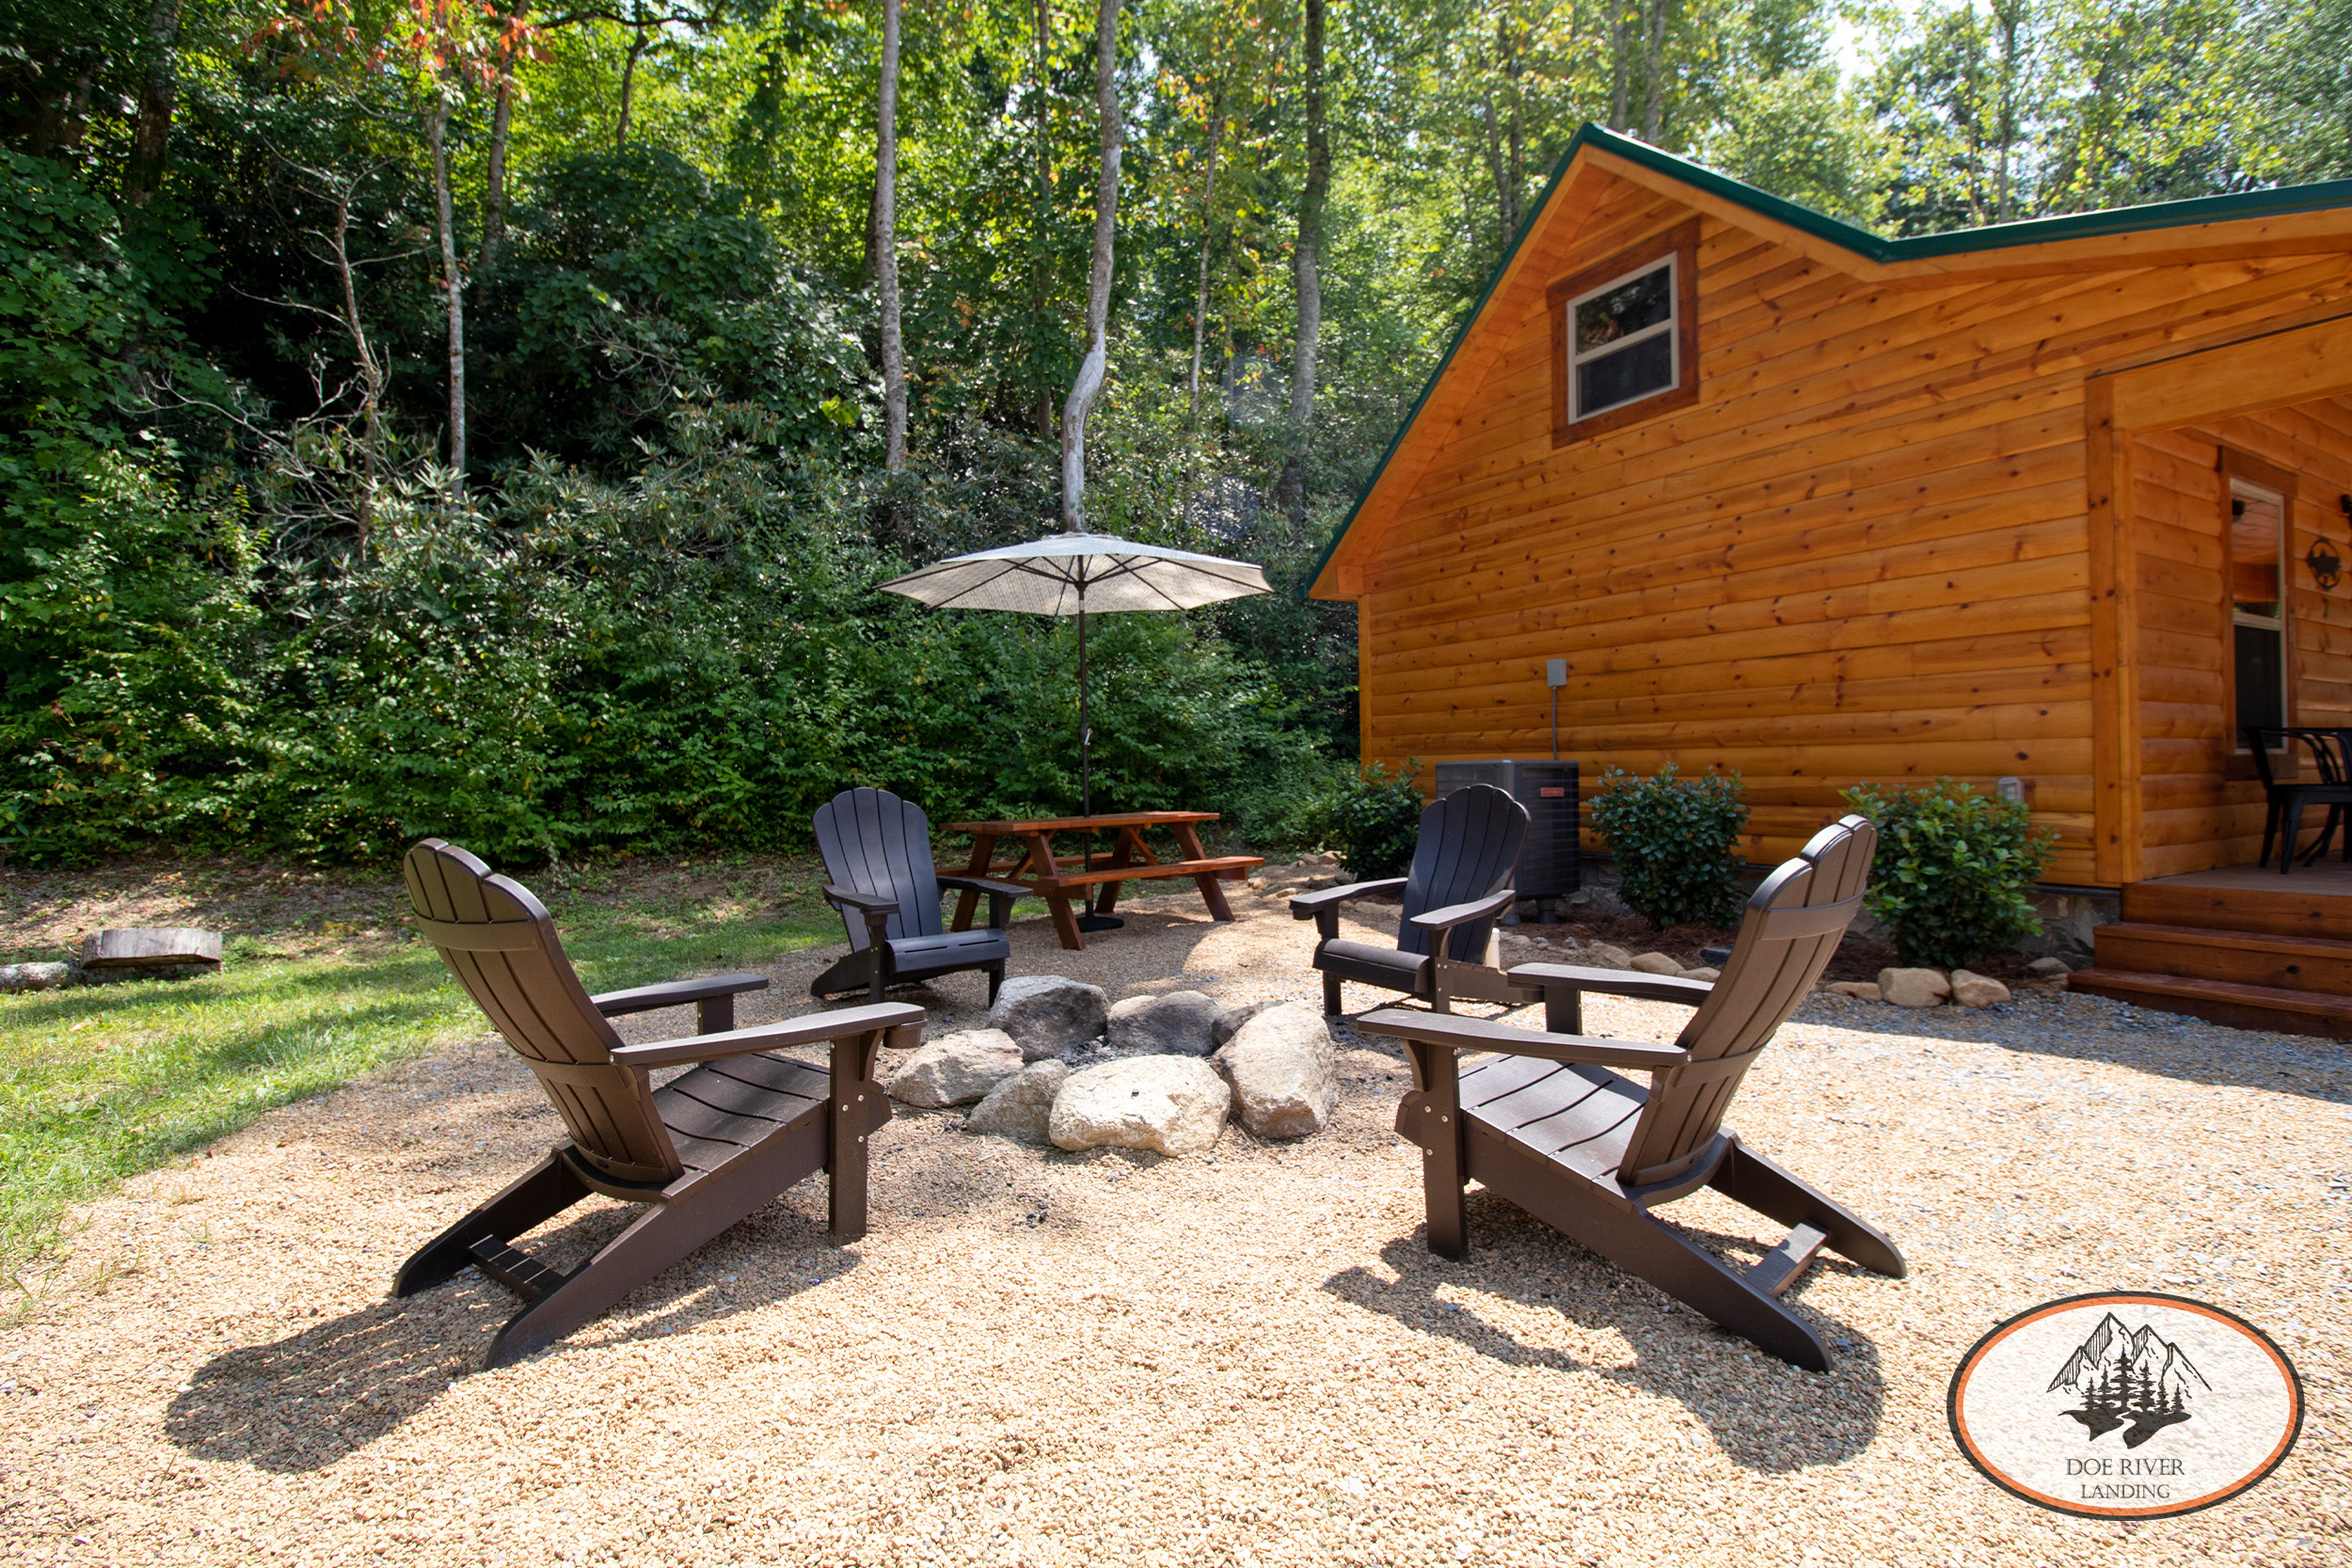 Doe River Landing campground in Roan Mountain, TN. Best vacation rental near Elizabethton, TN and Johnson City TN. Trout Cabin private riverside campsite with fire pit, picnic table, grill, and umbrella.